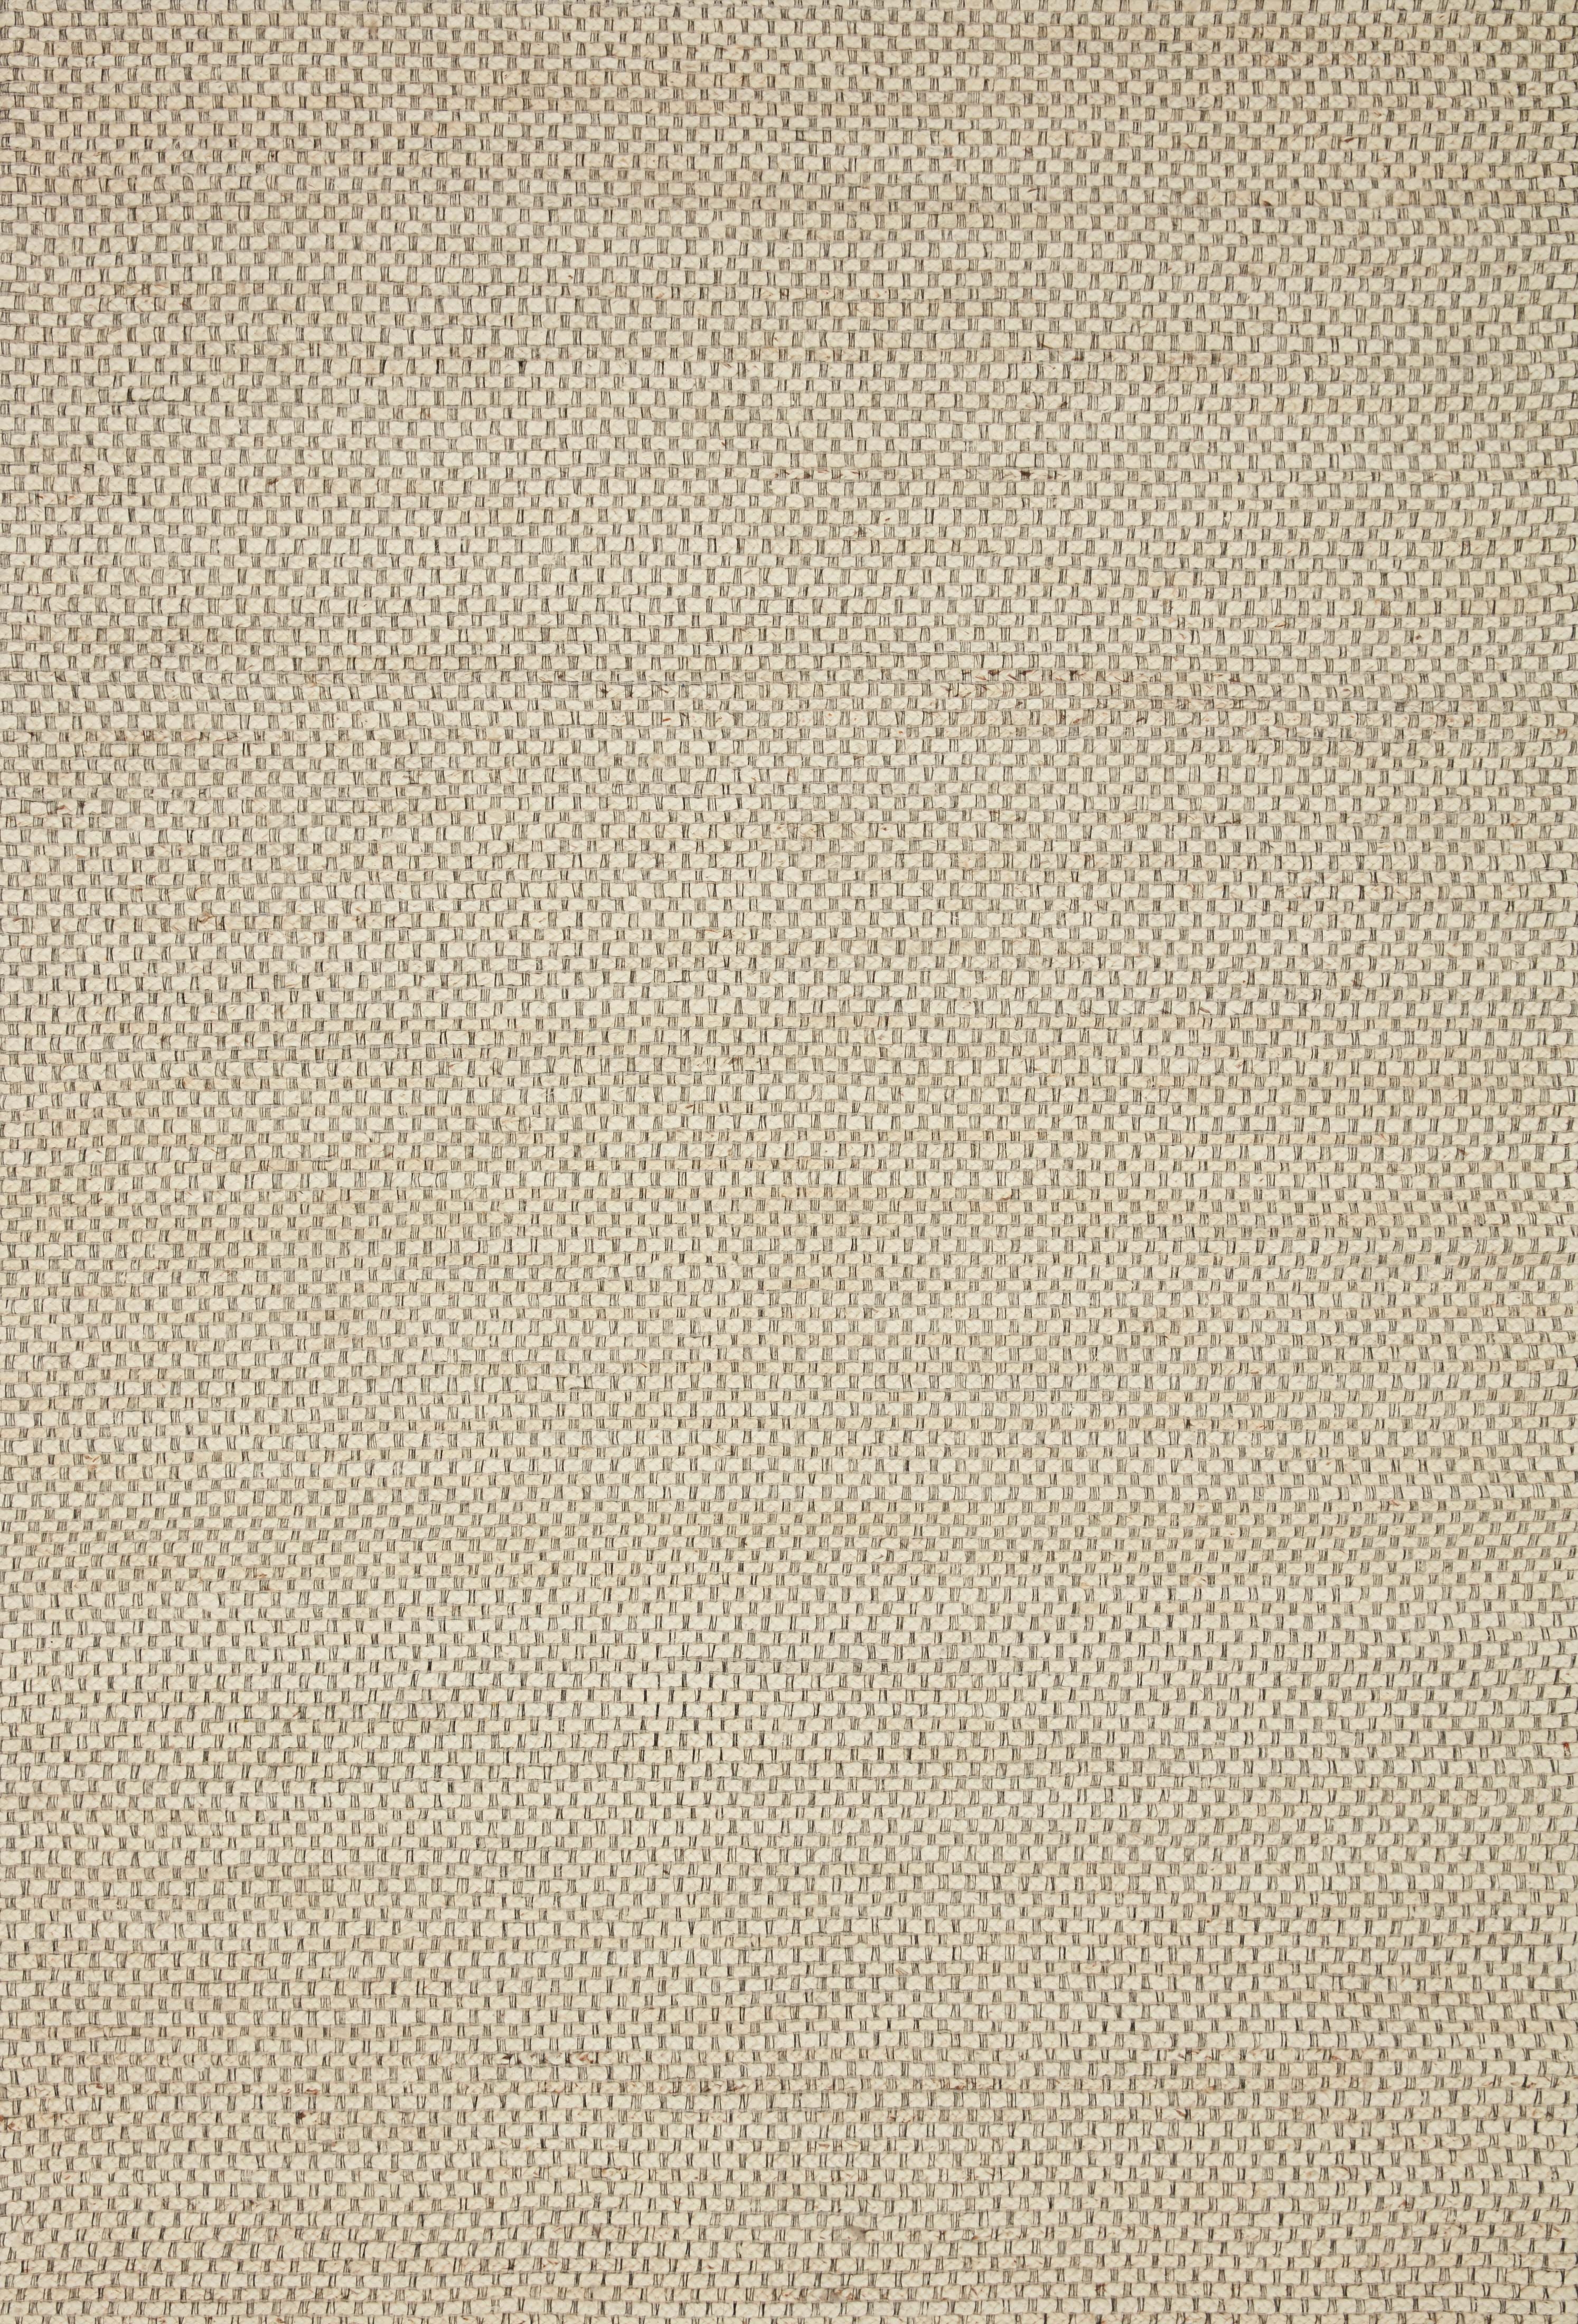 LILY LIL-01 Ivory 2'-6" x 7'-6" - Image 0